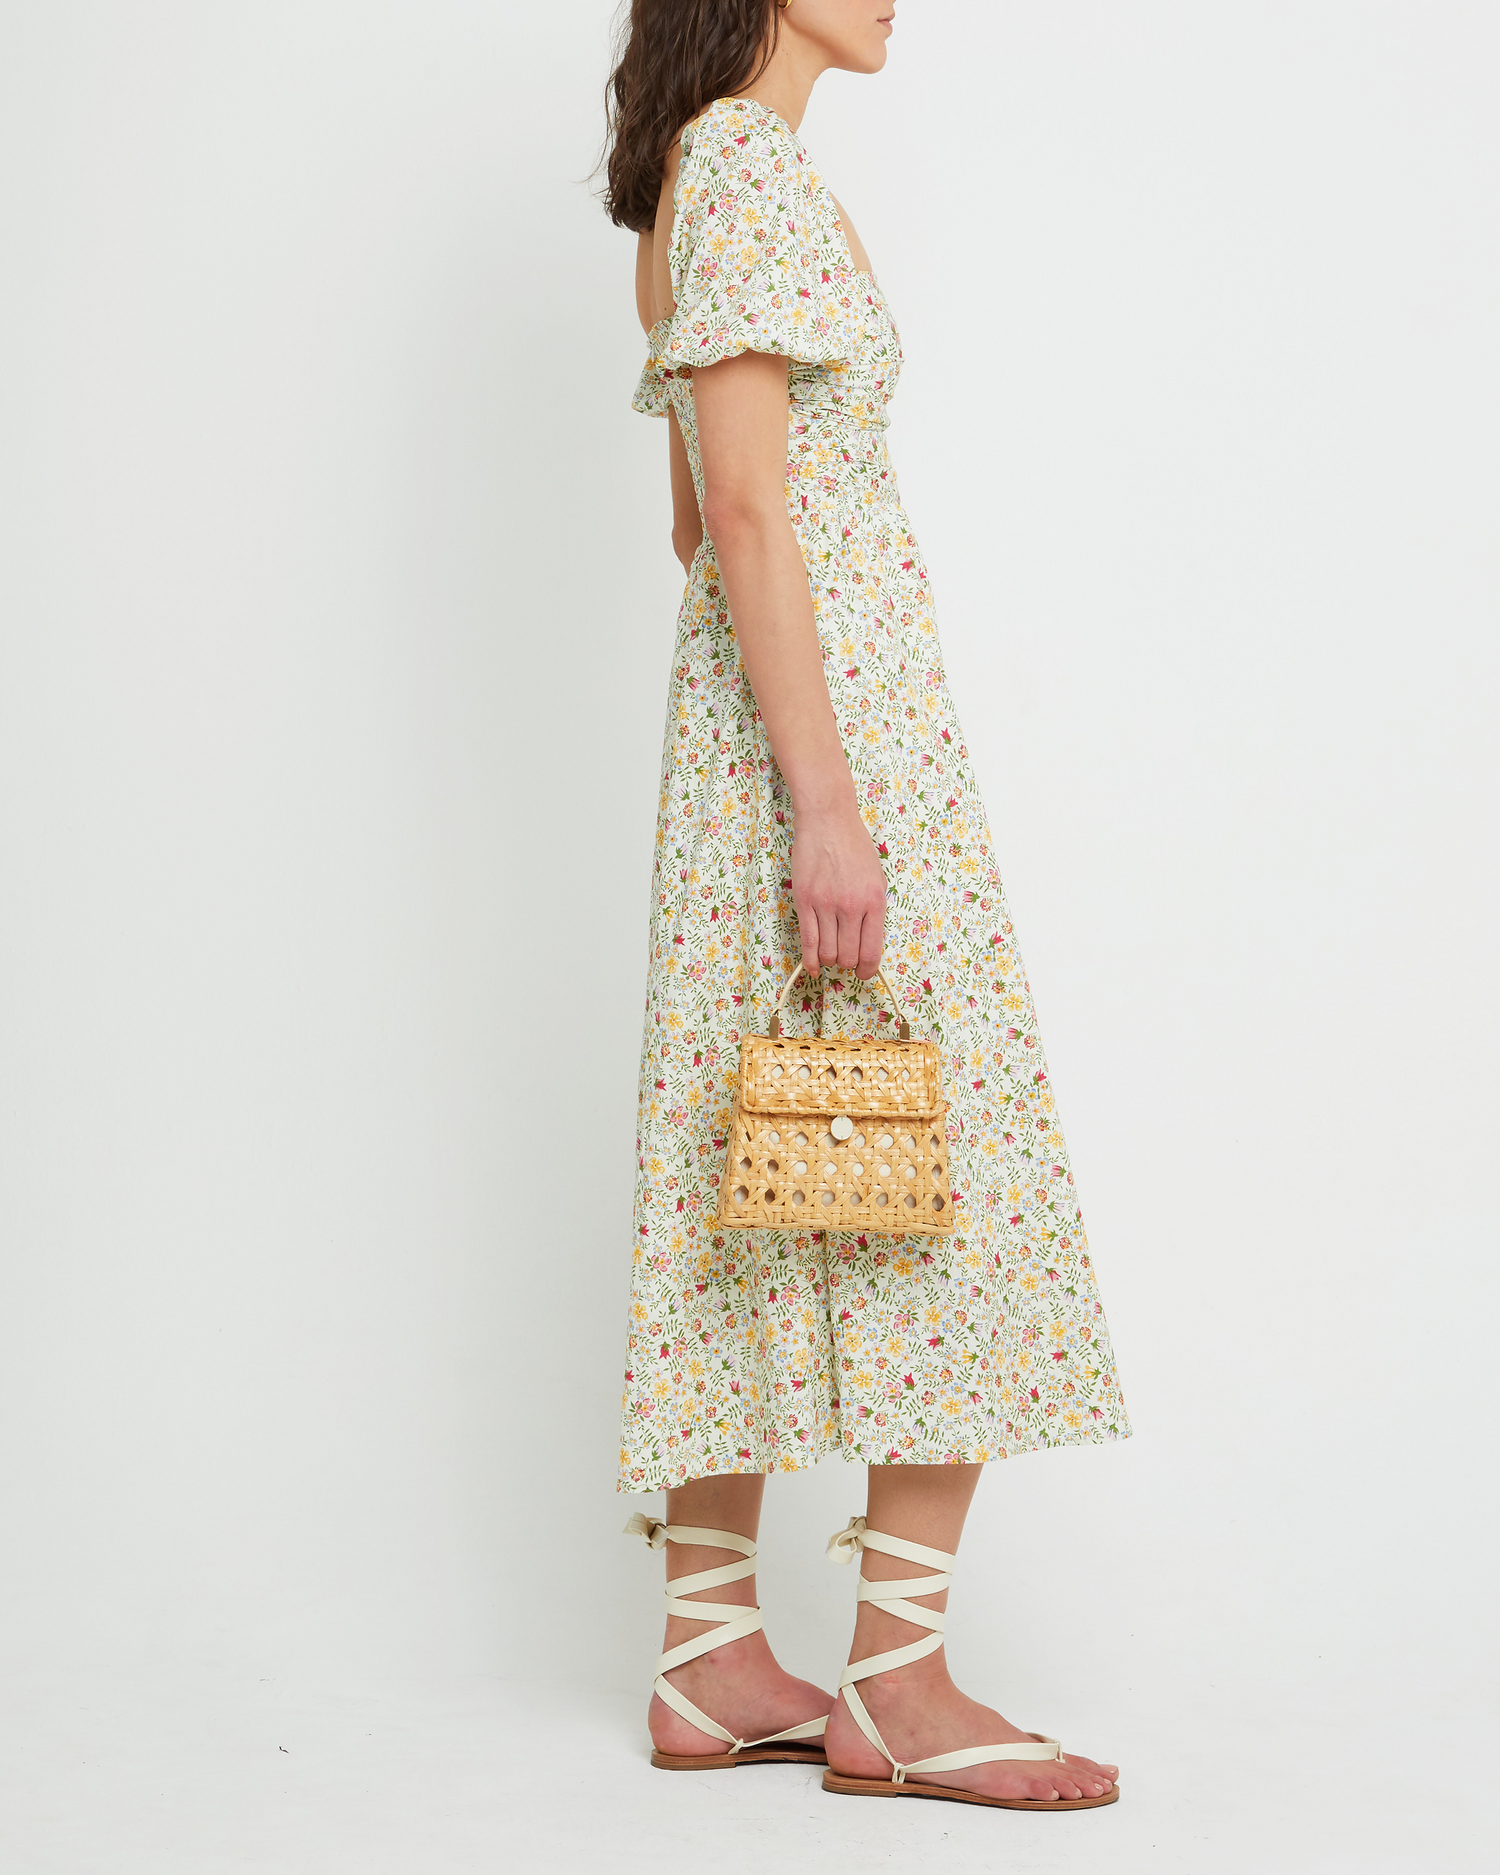 Third image of River Dress, a floral midi dress, square neckline, short puff sleeves, gathered bodice